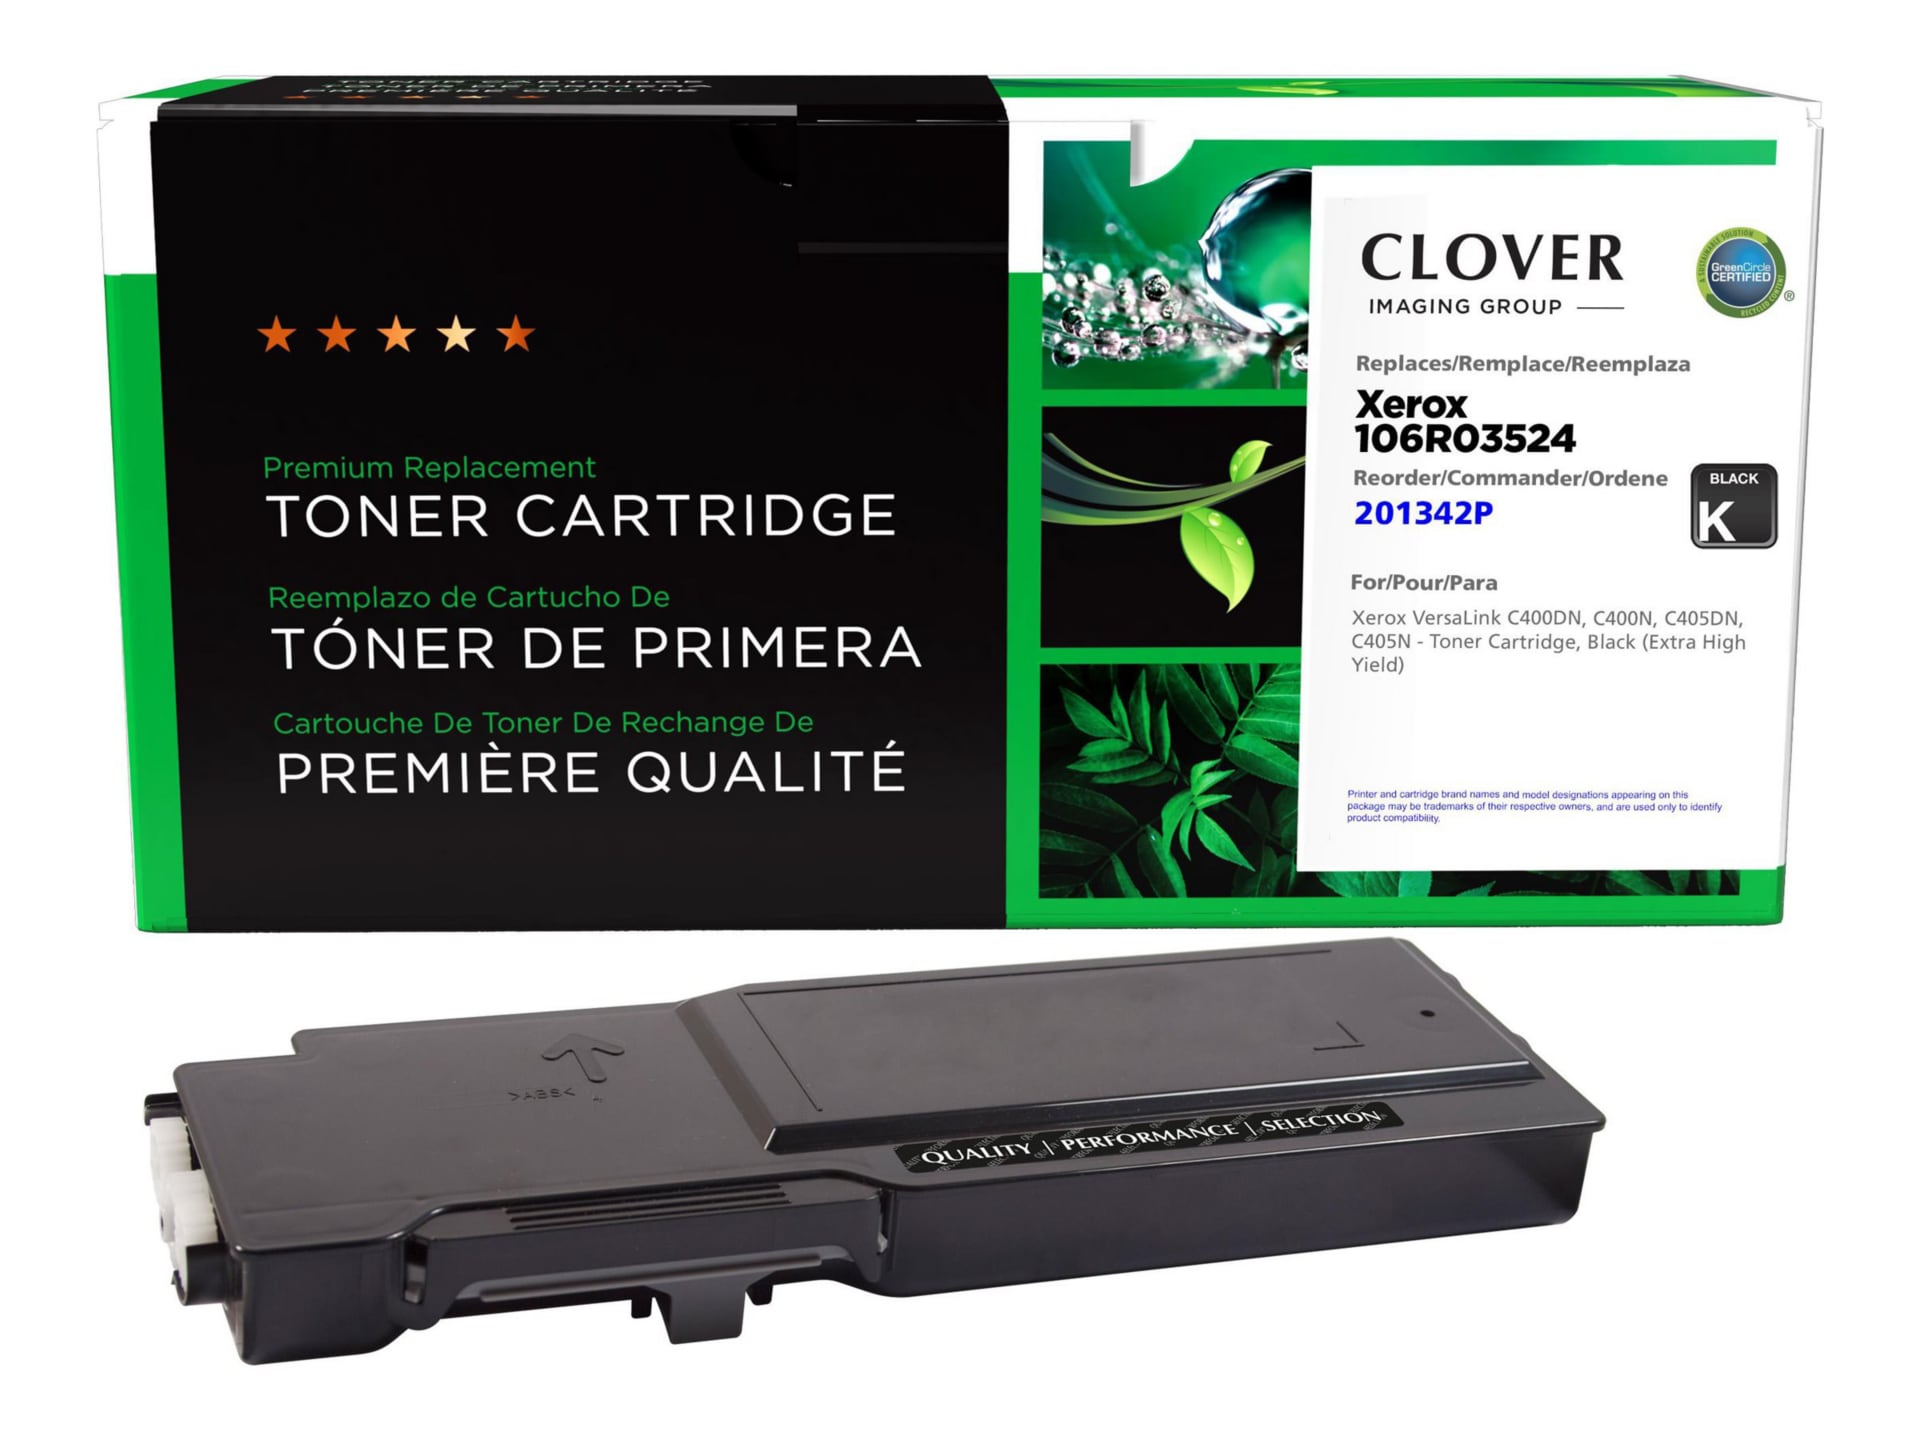 Clover Imaging Group - Extra High Yield - black - compatible - remanufactur